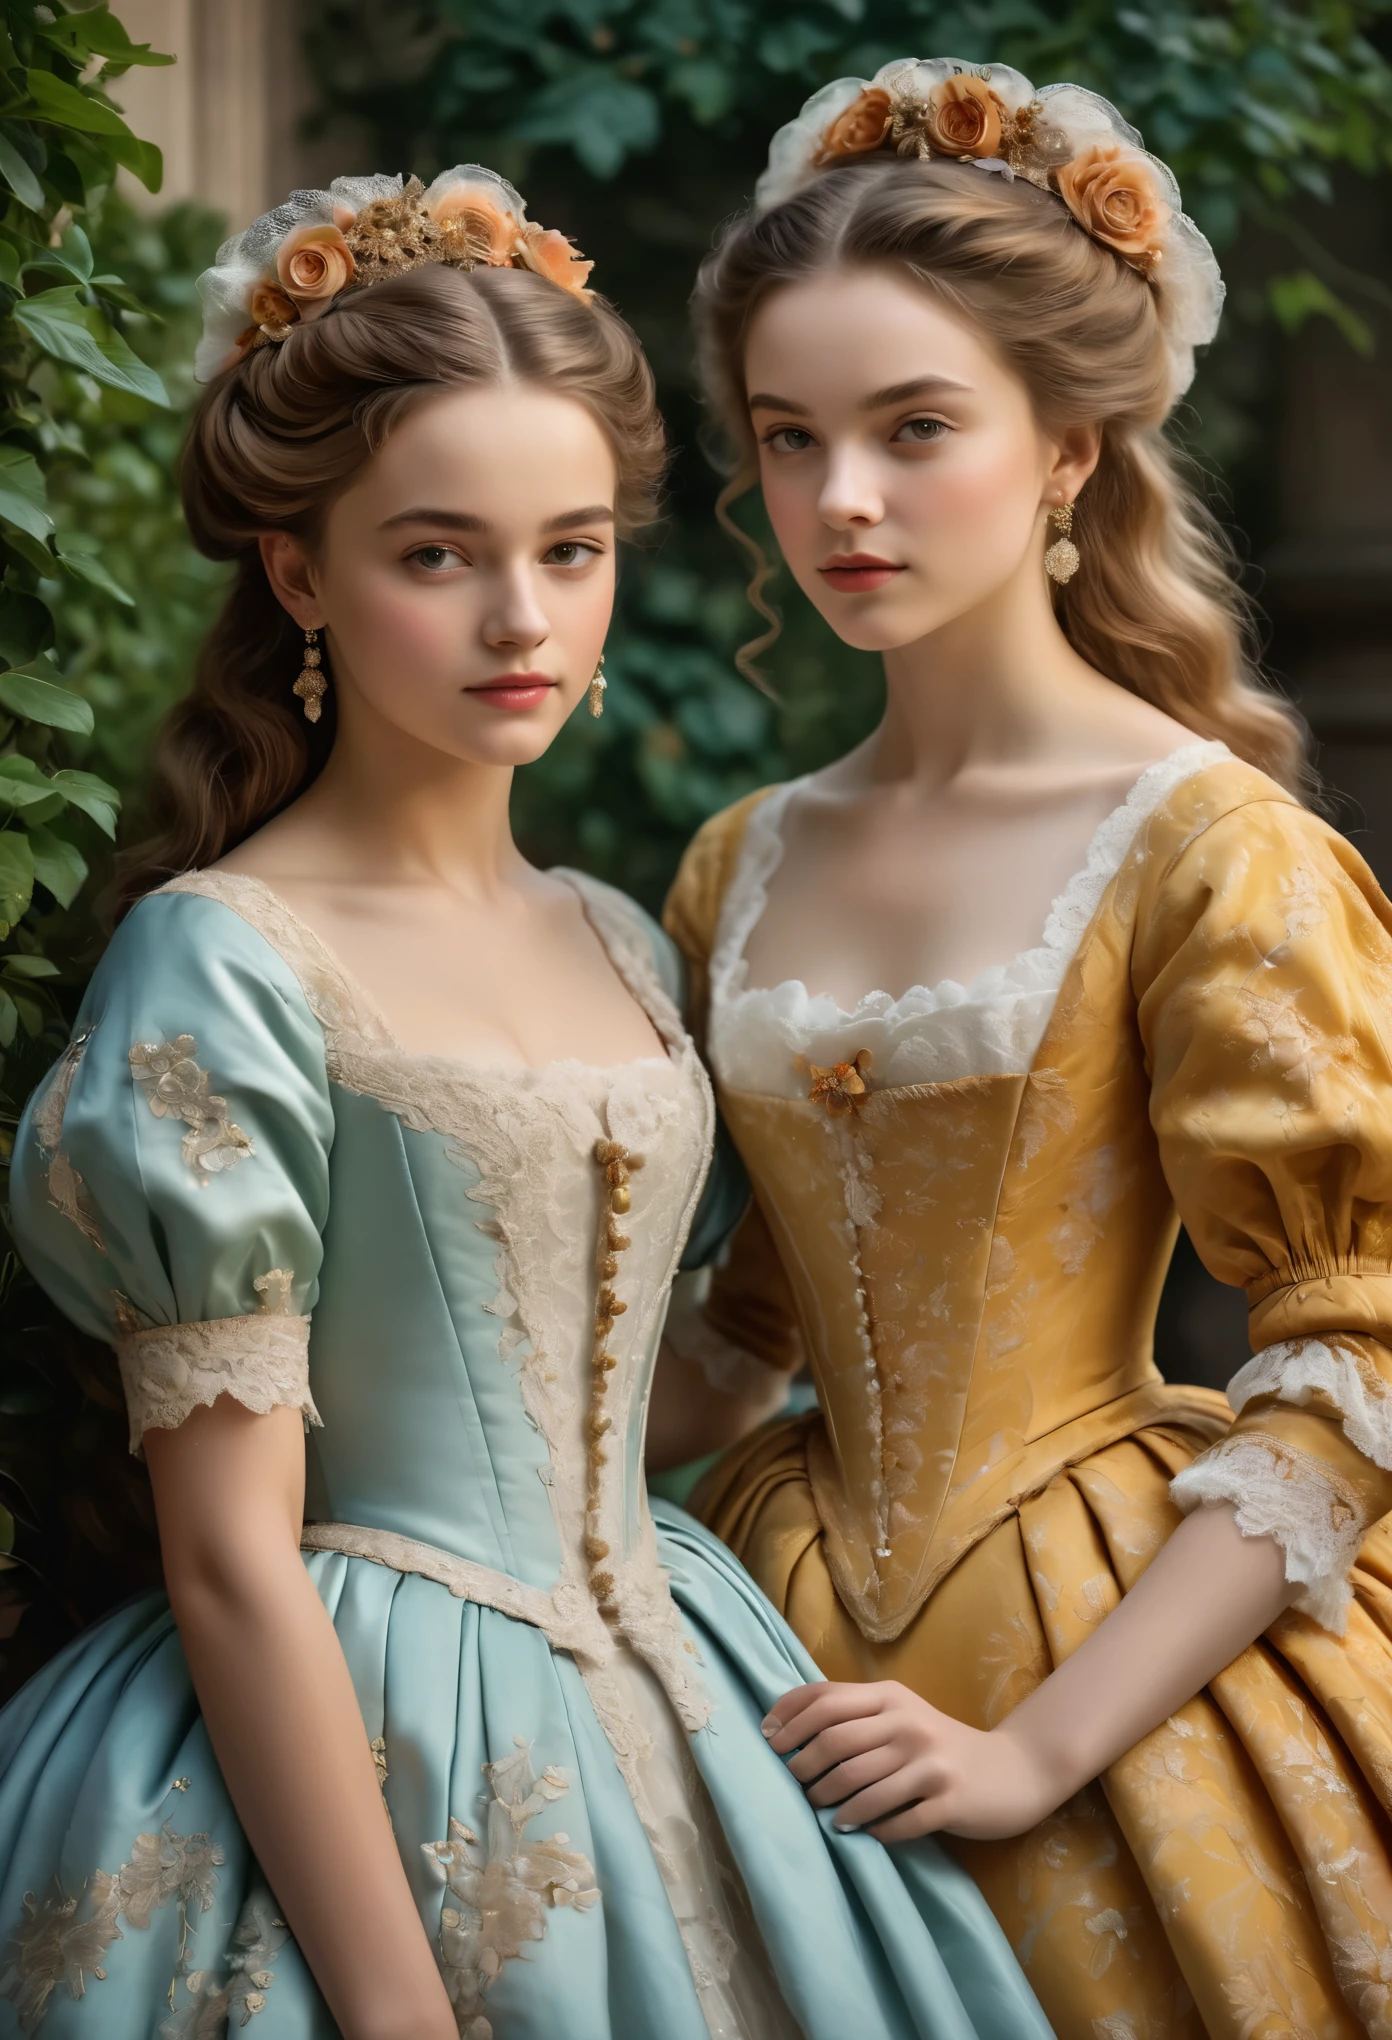 (best quality,4k,8k,highres,masterpiece:1.2),ultra-detailed,(realistic,photorealistic,photo-realistic:1.37),18th century,beautiful British sisters portrait,15-year-old and 12-year-old,nobility,classic,exquisite attire,ornate hairstyles,elegant posture,vibrant colors,soft lighting,subtle shadows,lush garden background,delicate lace patterns,gentle expressions,engaging gazes,intense bond between the sisters,serene atmosphere